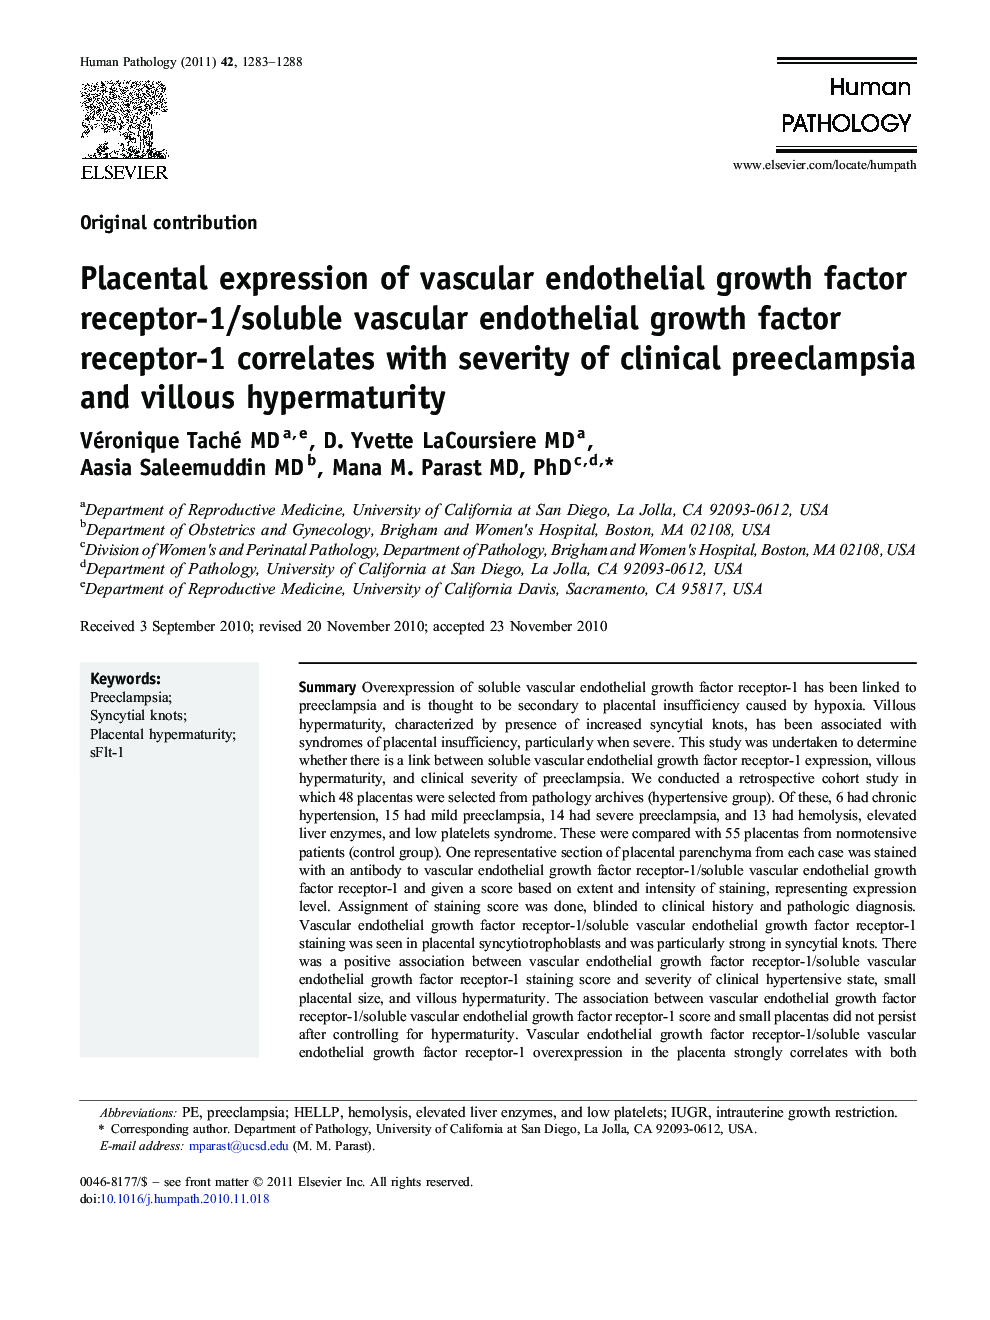 Placental expression of vascular endothelial growth factor receptor-1/soluble vascular endothelial growth factor receptor-1 correlates with severity of clinical preeclampsia and villous hypermaturity